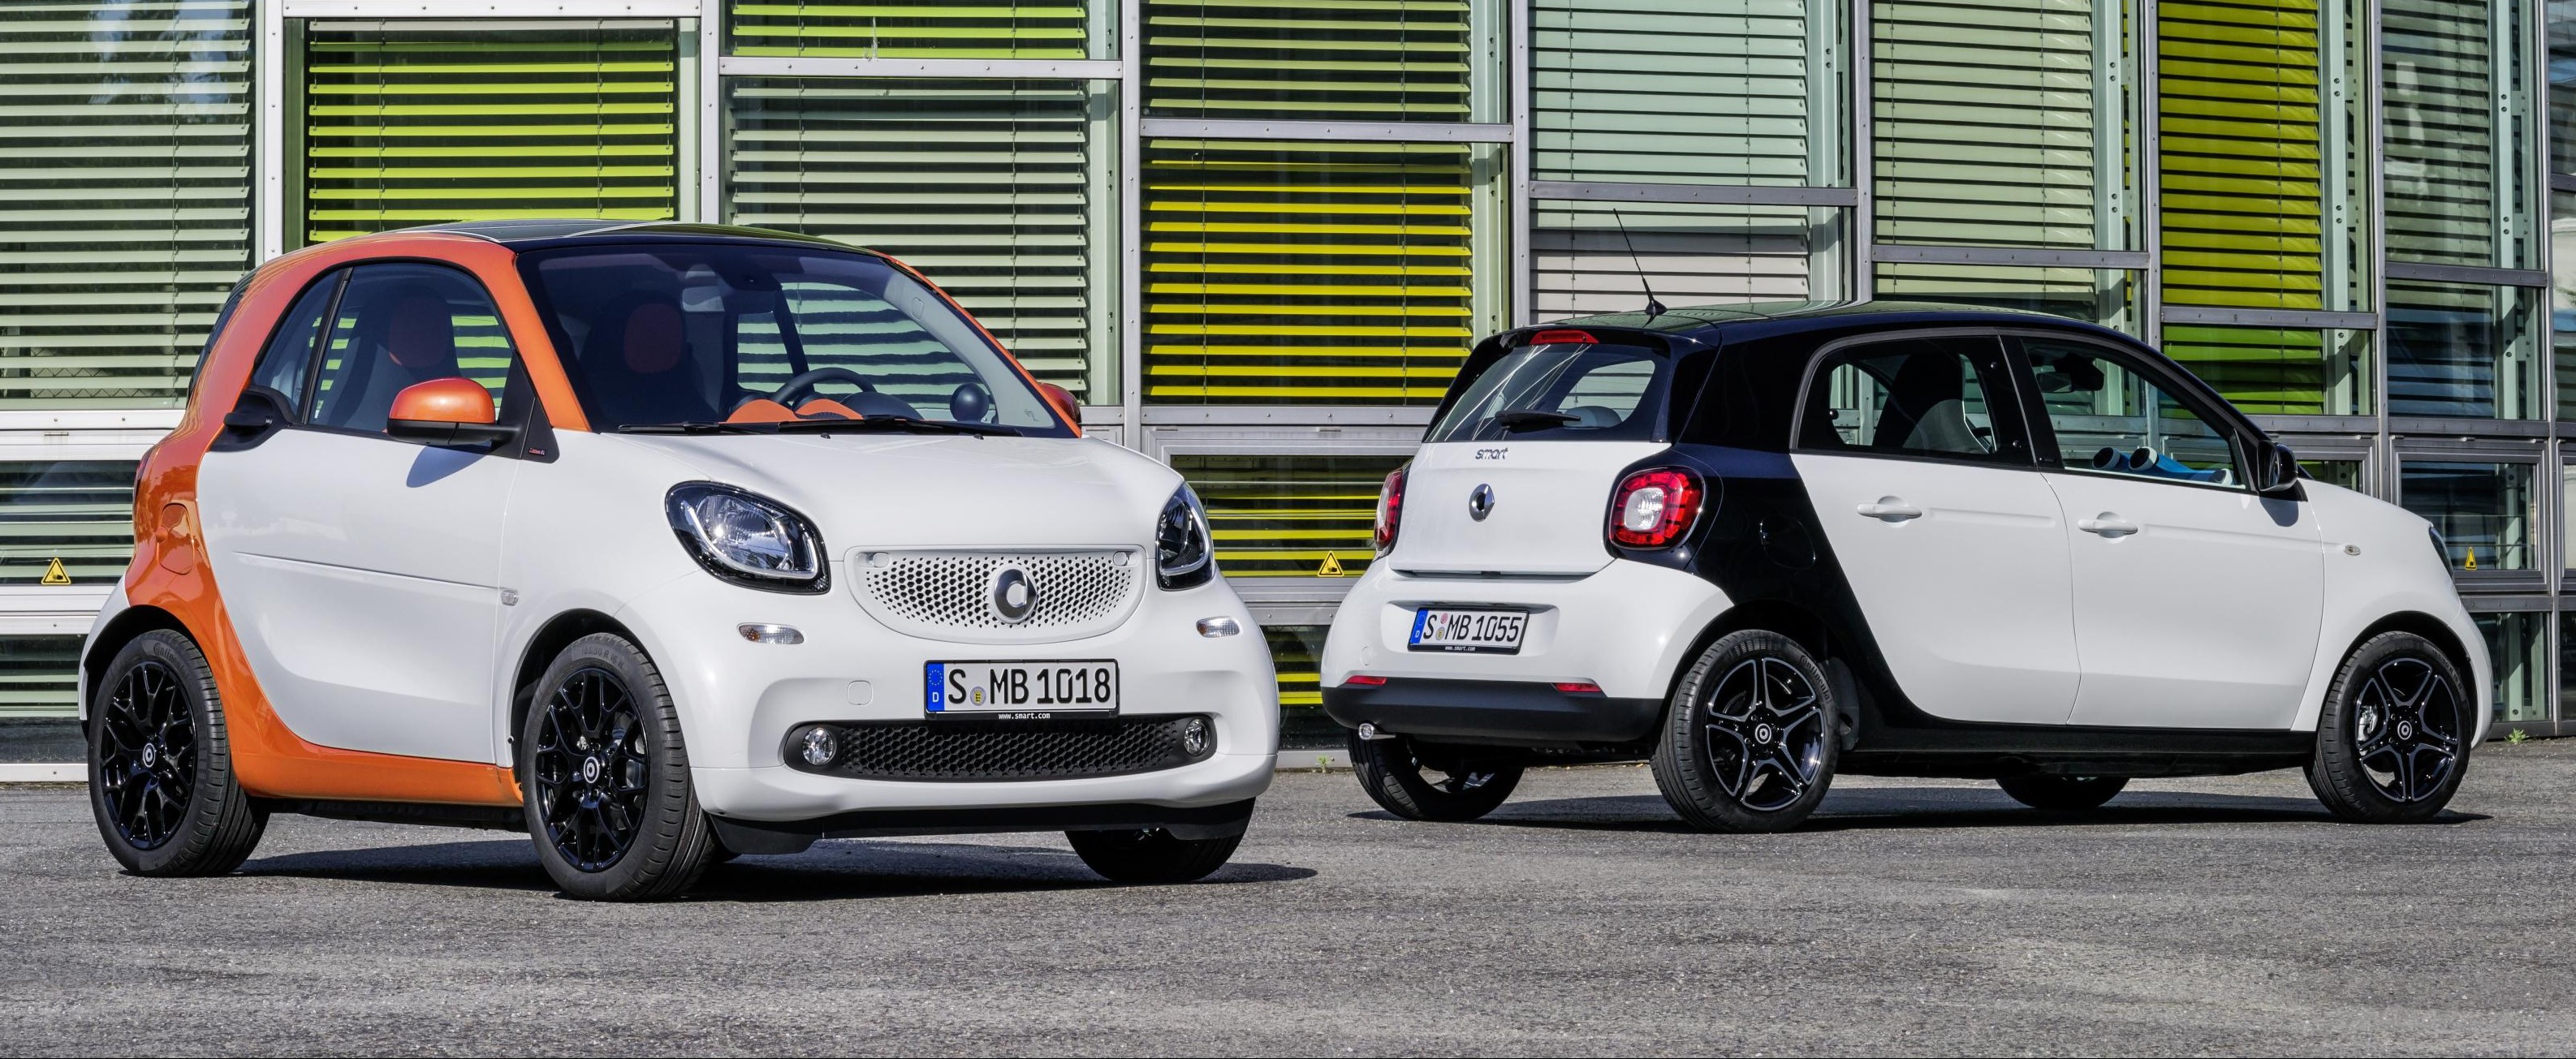 2016 smart fortwo (36)